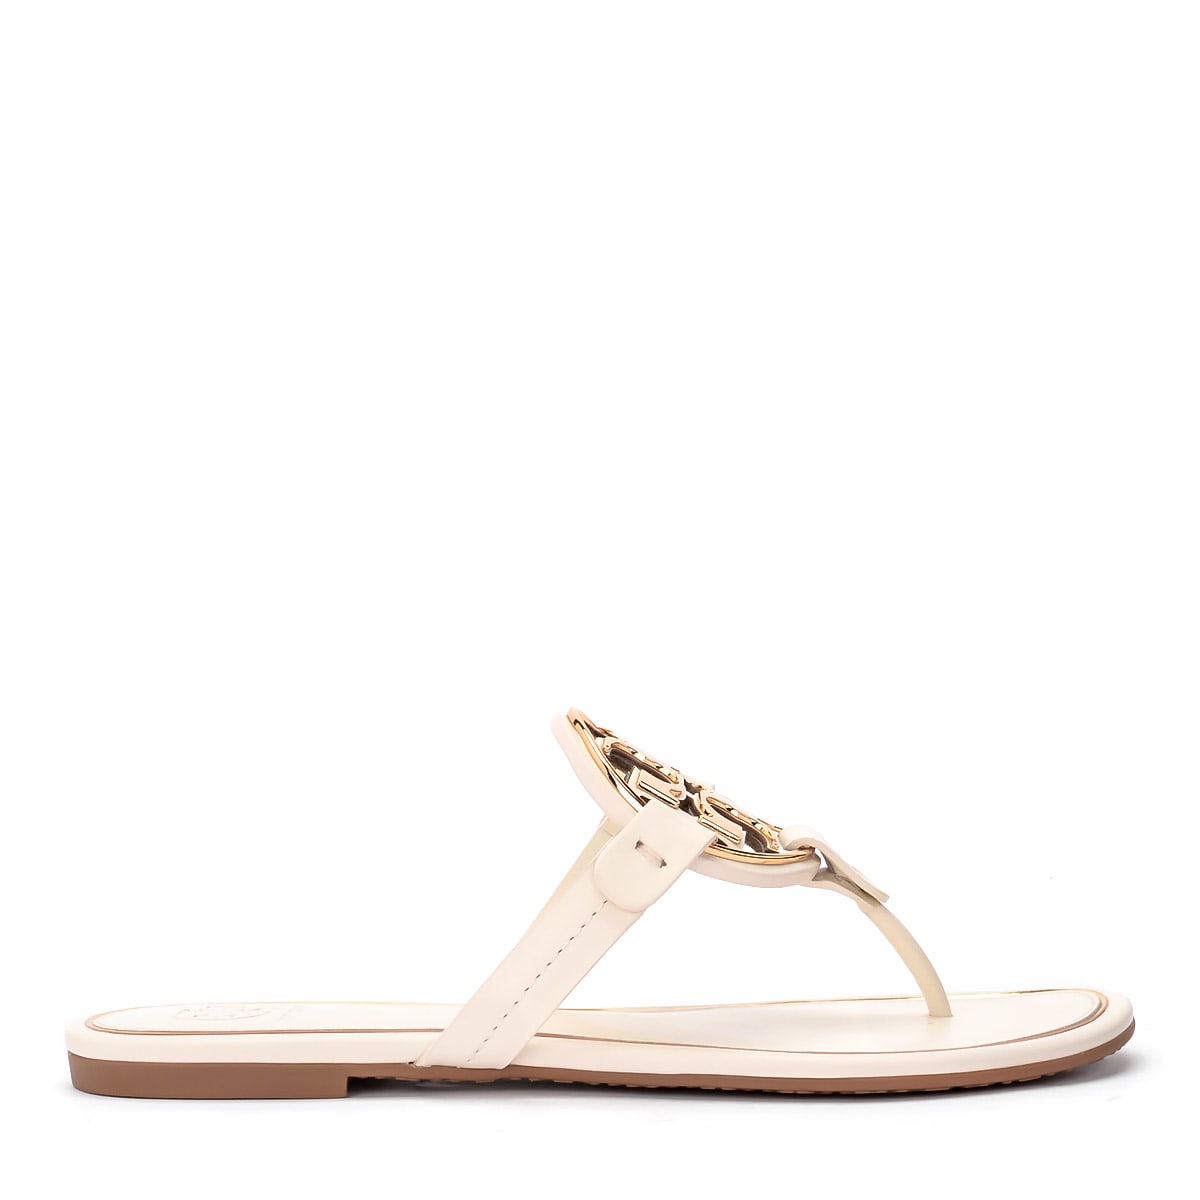 Buy Tory Burch Miller White Leather Sandal online, shop Tory Burch shoes with free shipping